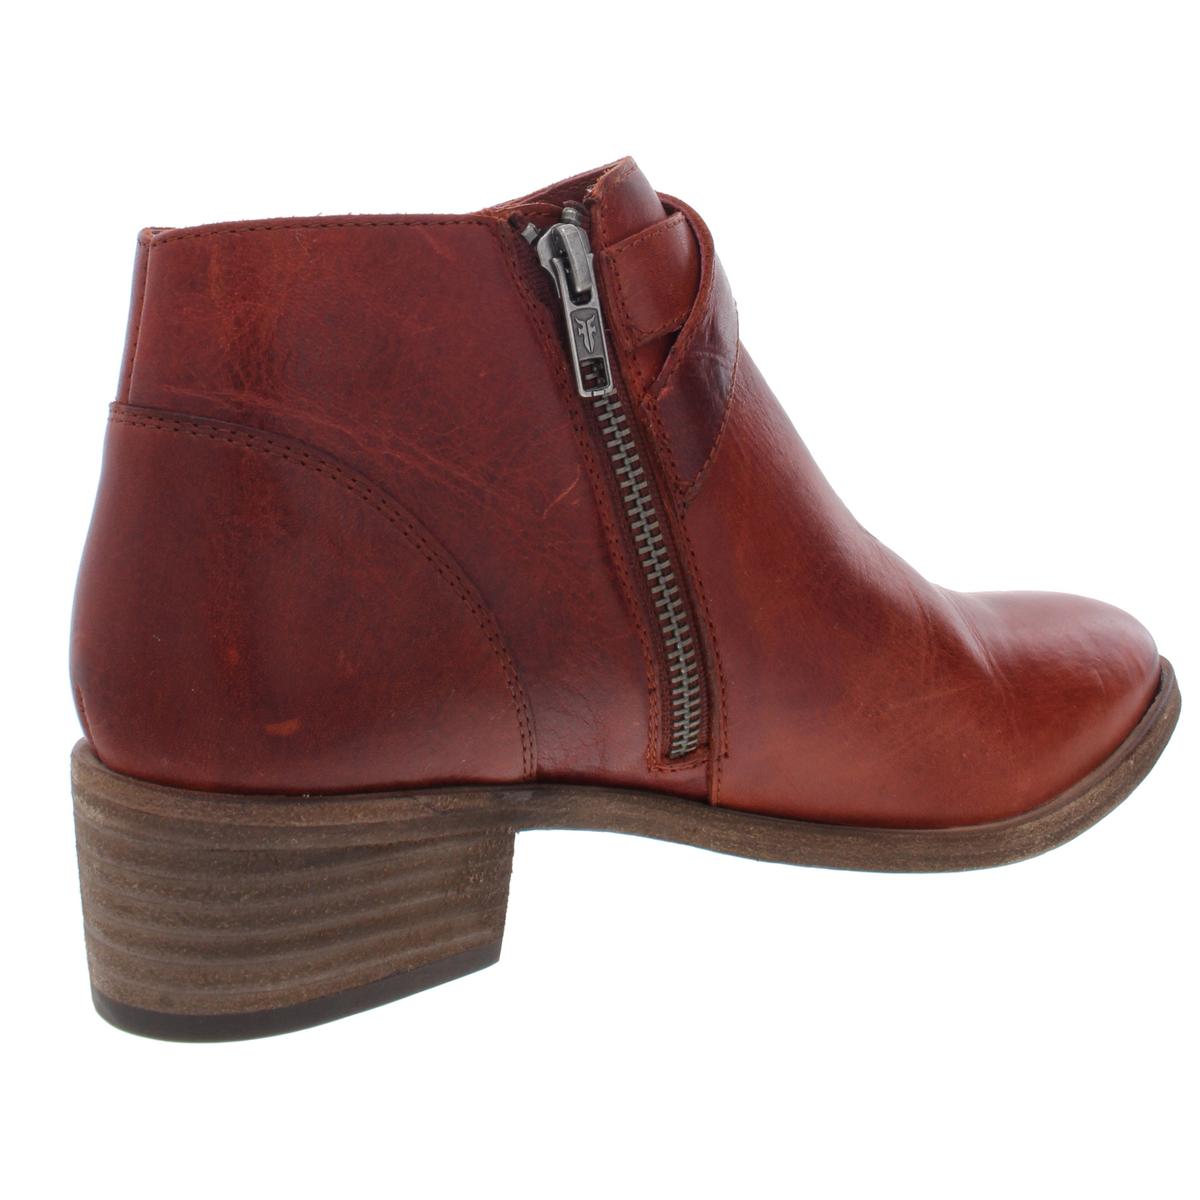 Frye Womens Ray Red Leather Buckle Shooties Boots 8 Medium (B,M) BHFO